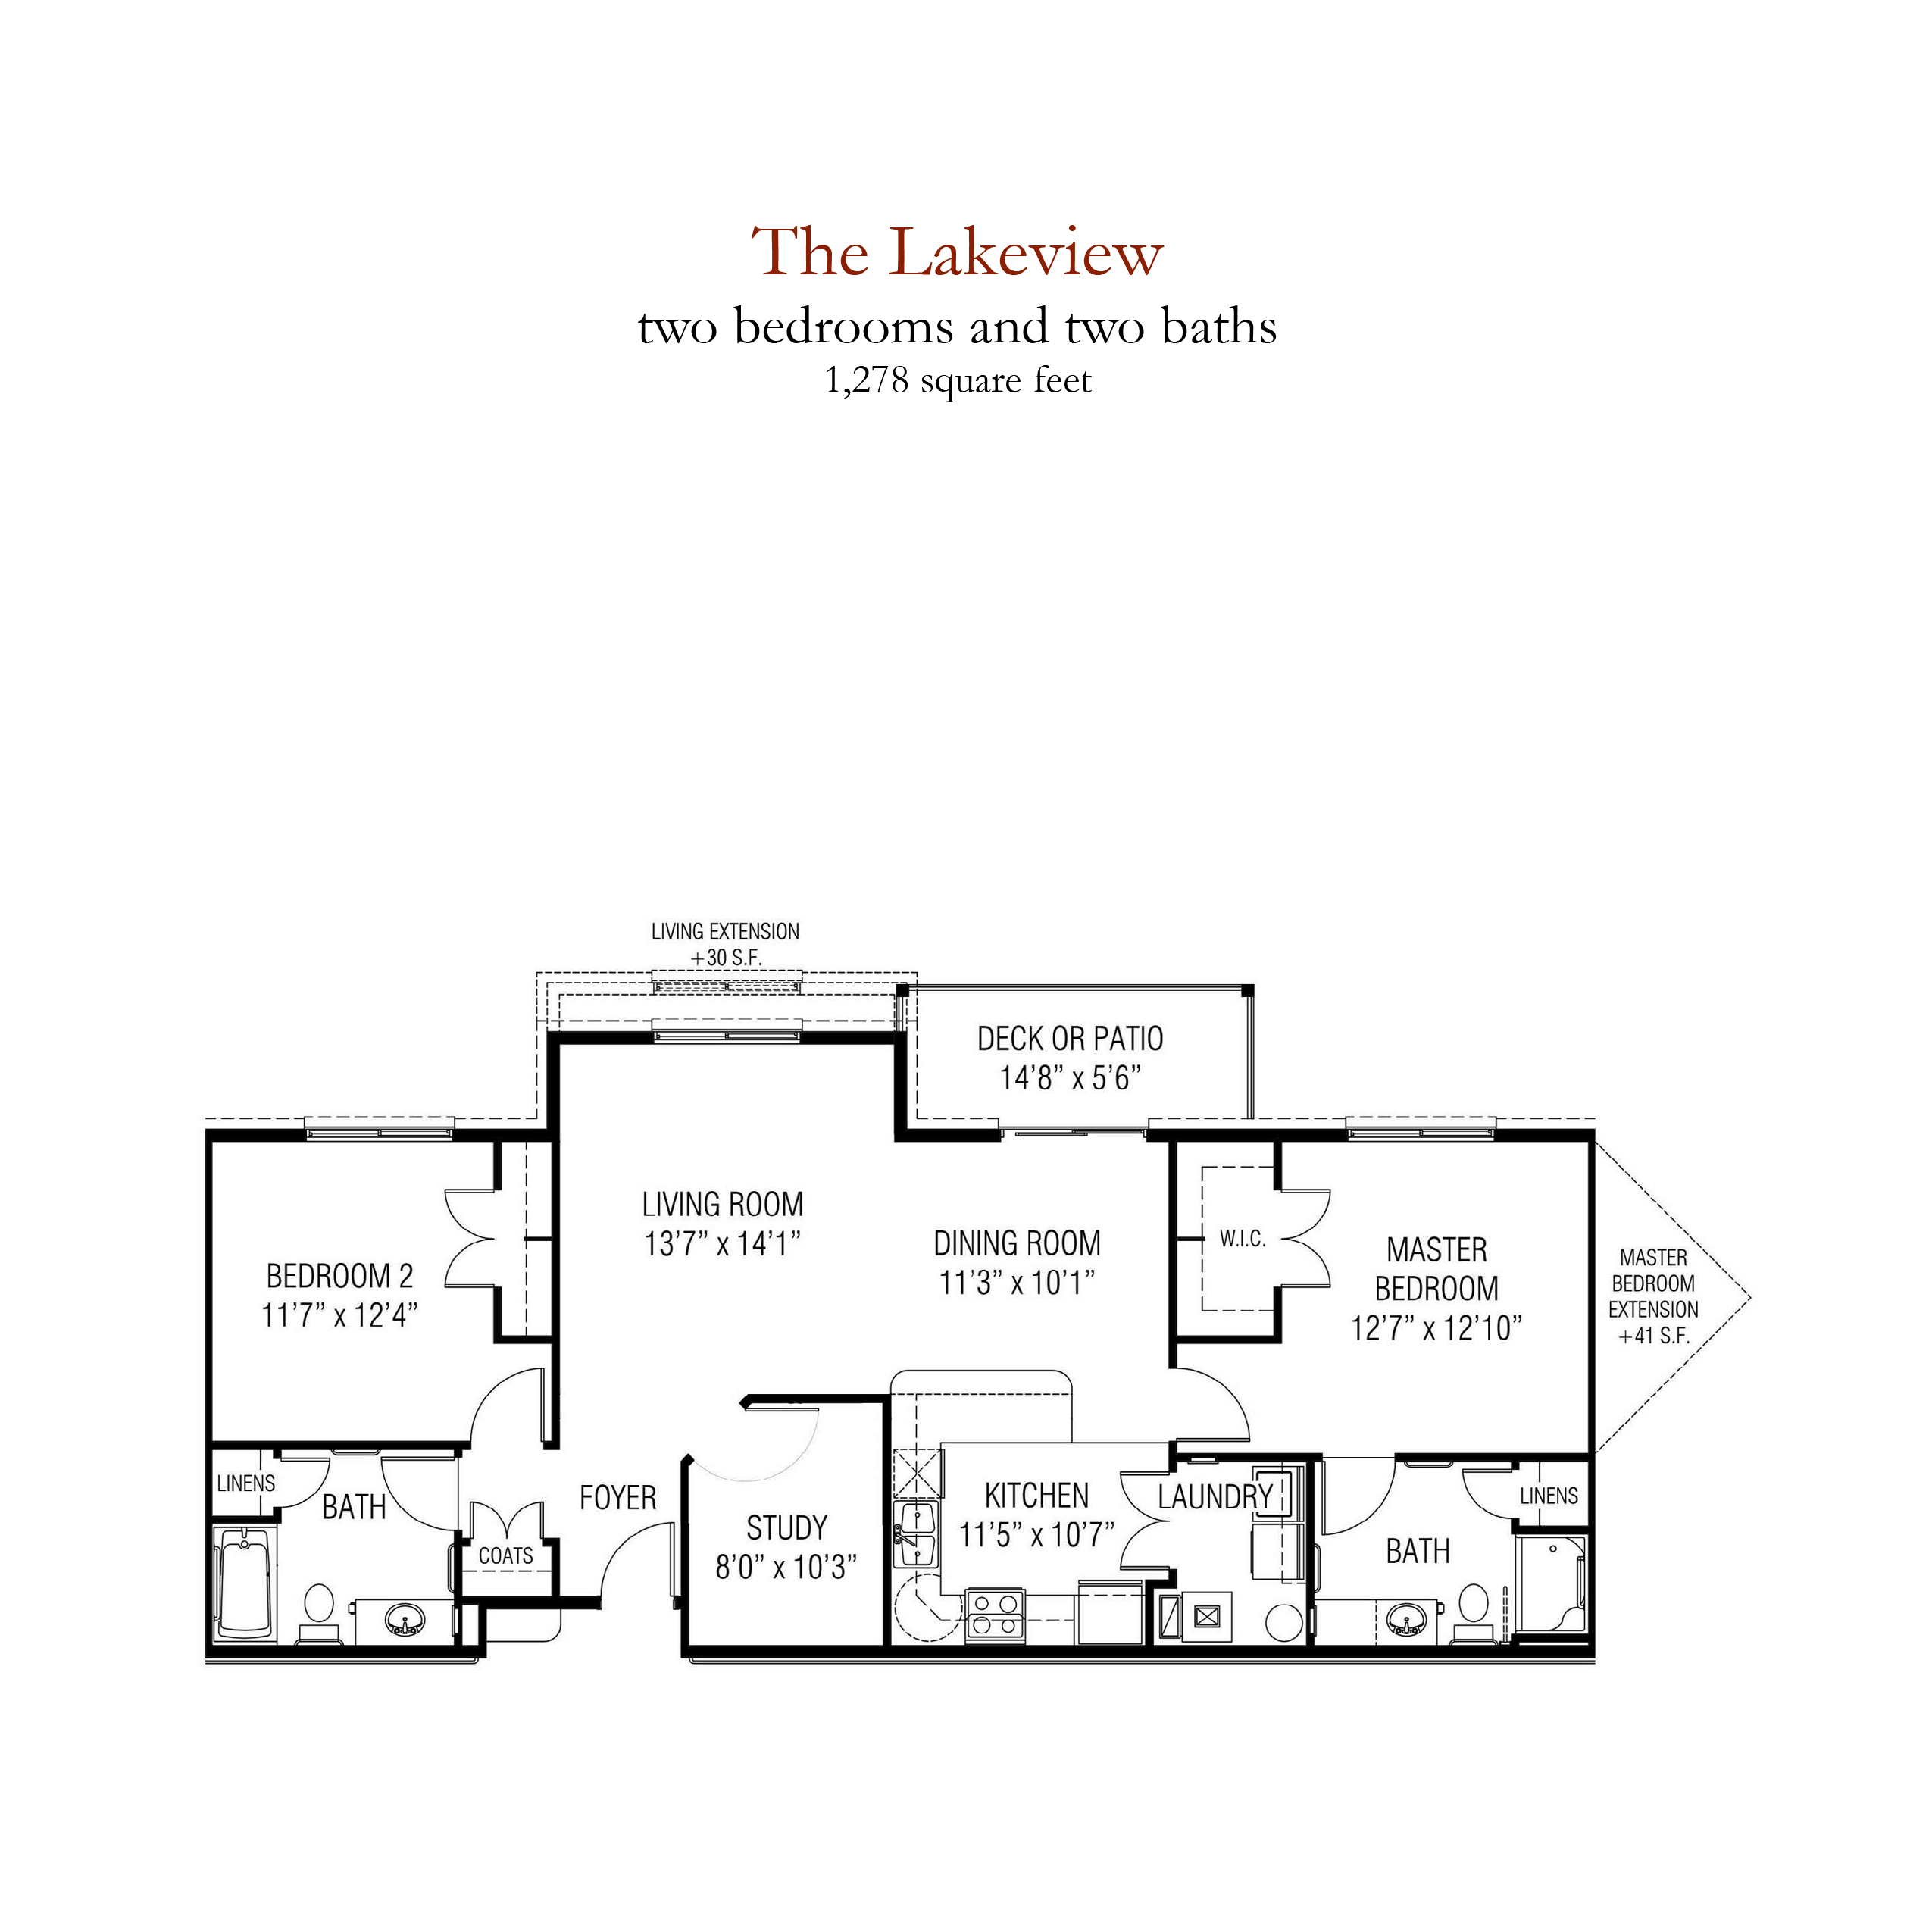 The Lakeview senior living - 2 bedrooms and 2 bathrooms floor plan